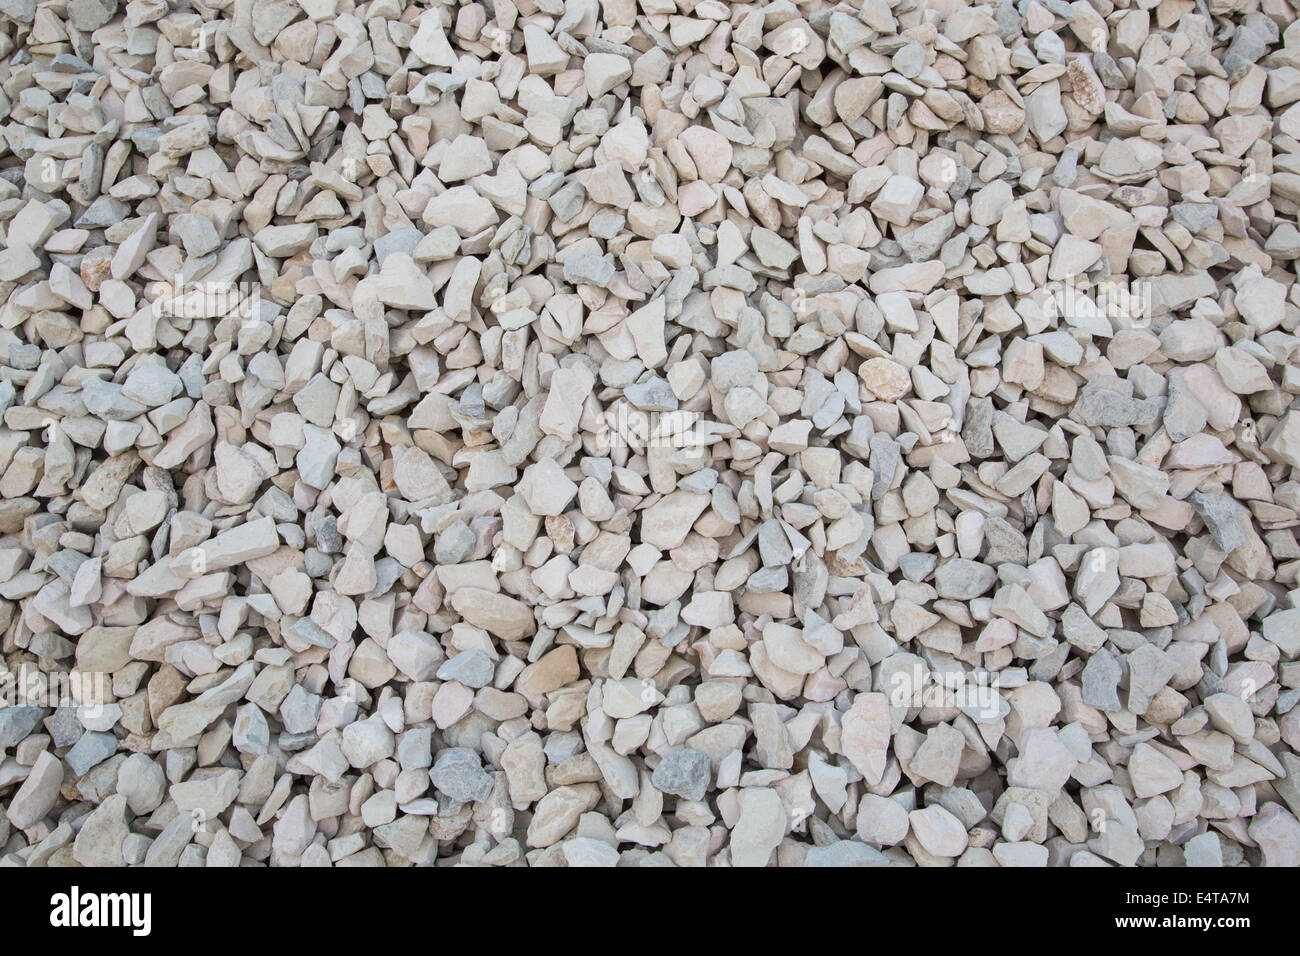 Small gravel of light grey color.Background Stock Photo - Alamy